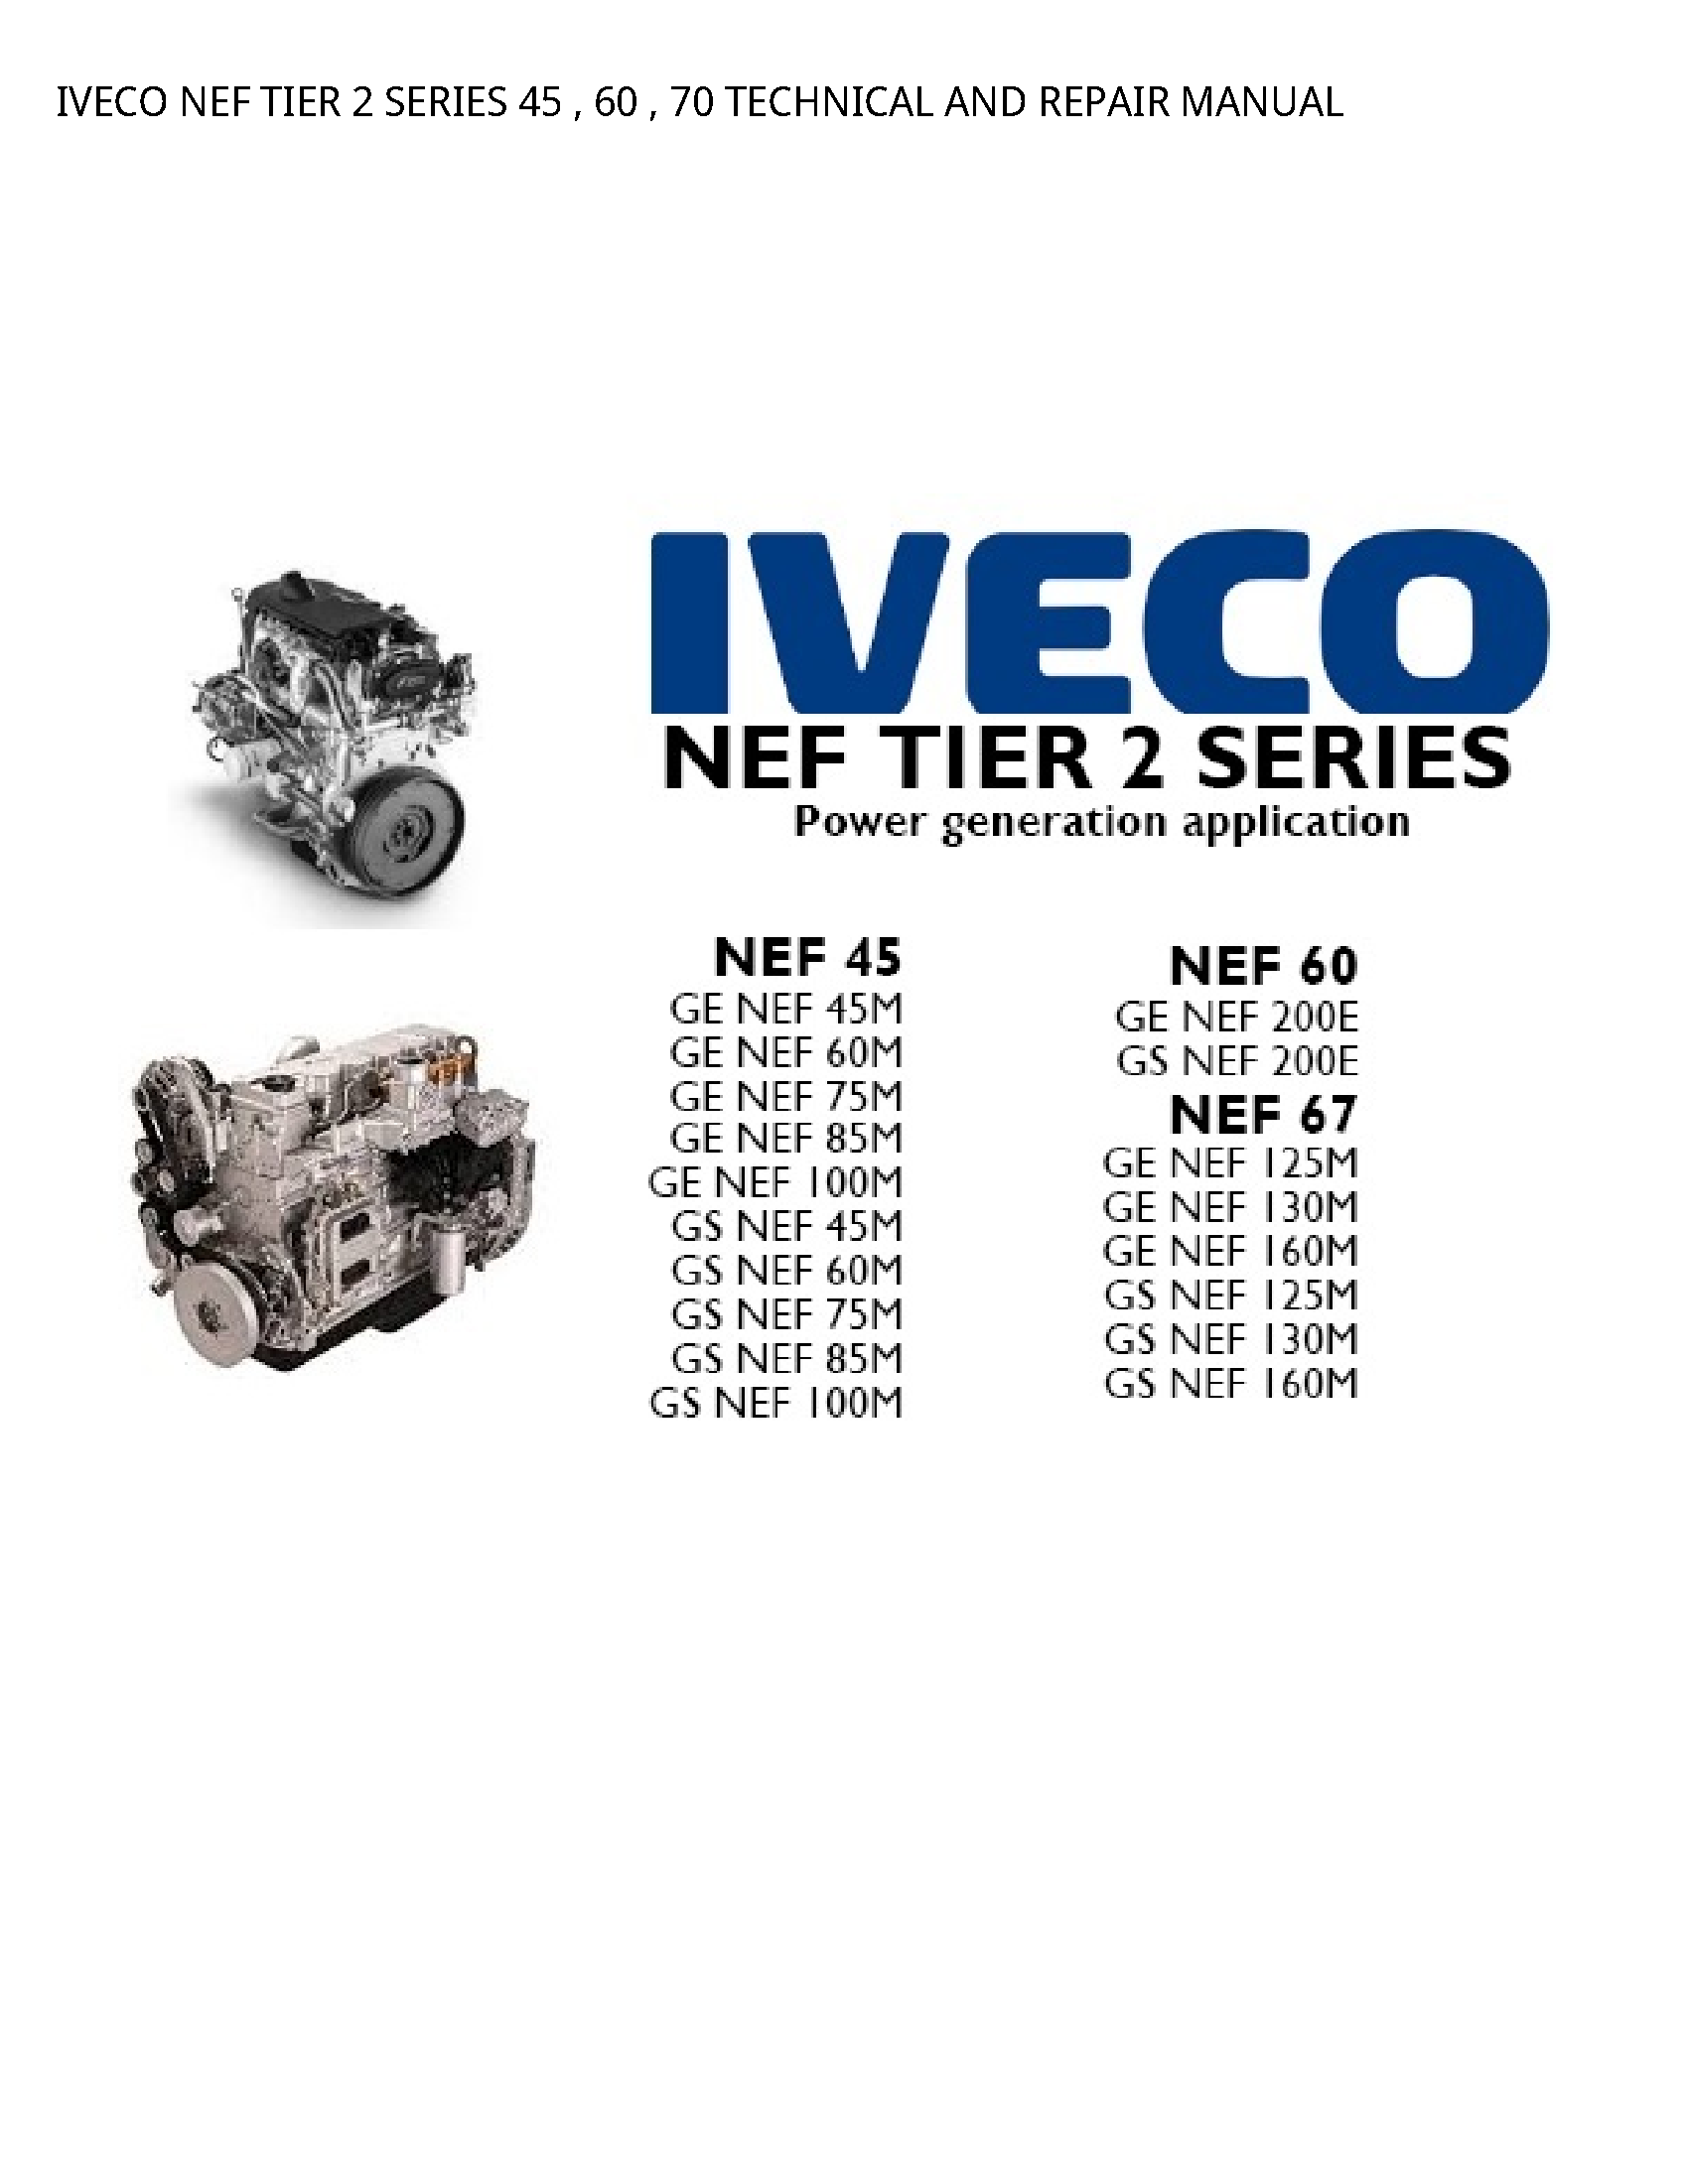 Iveco 2 NEF TIER SERIES TECHNICAL AND REPAIR manual